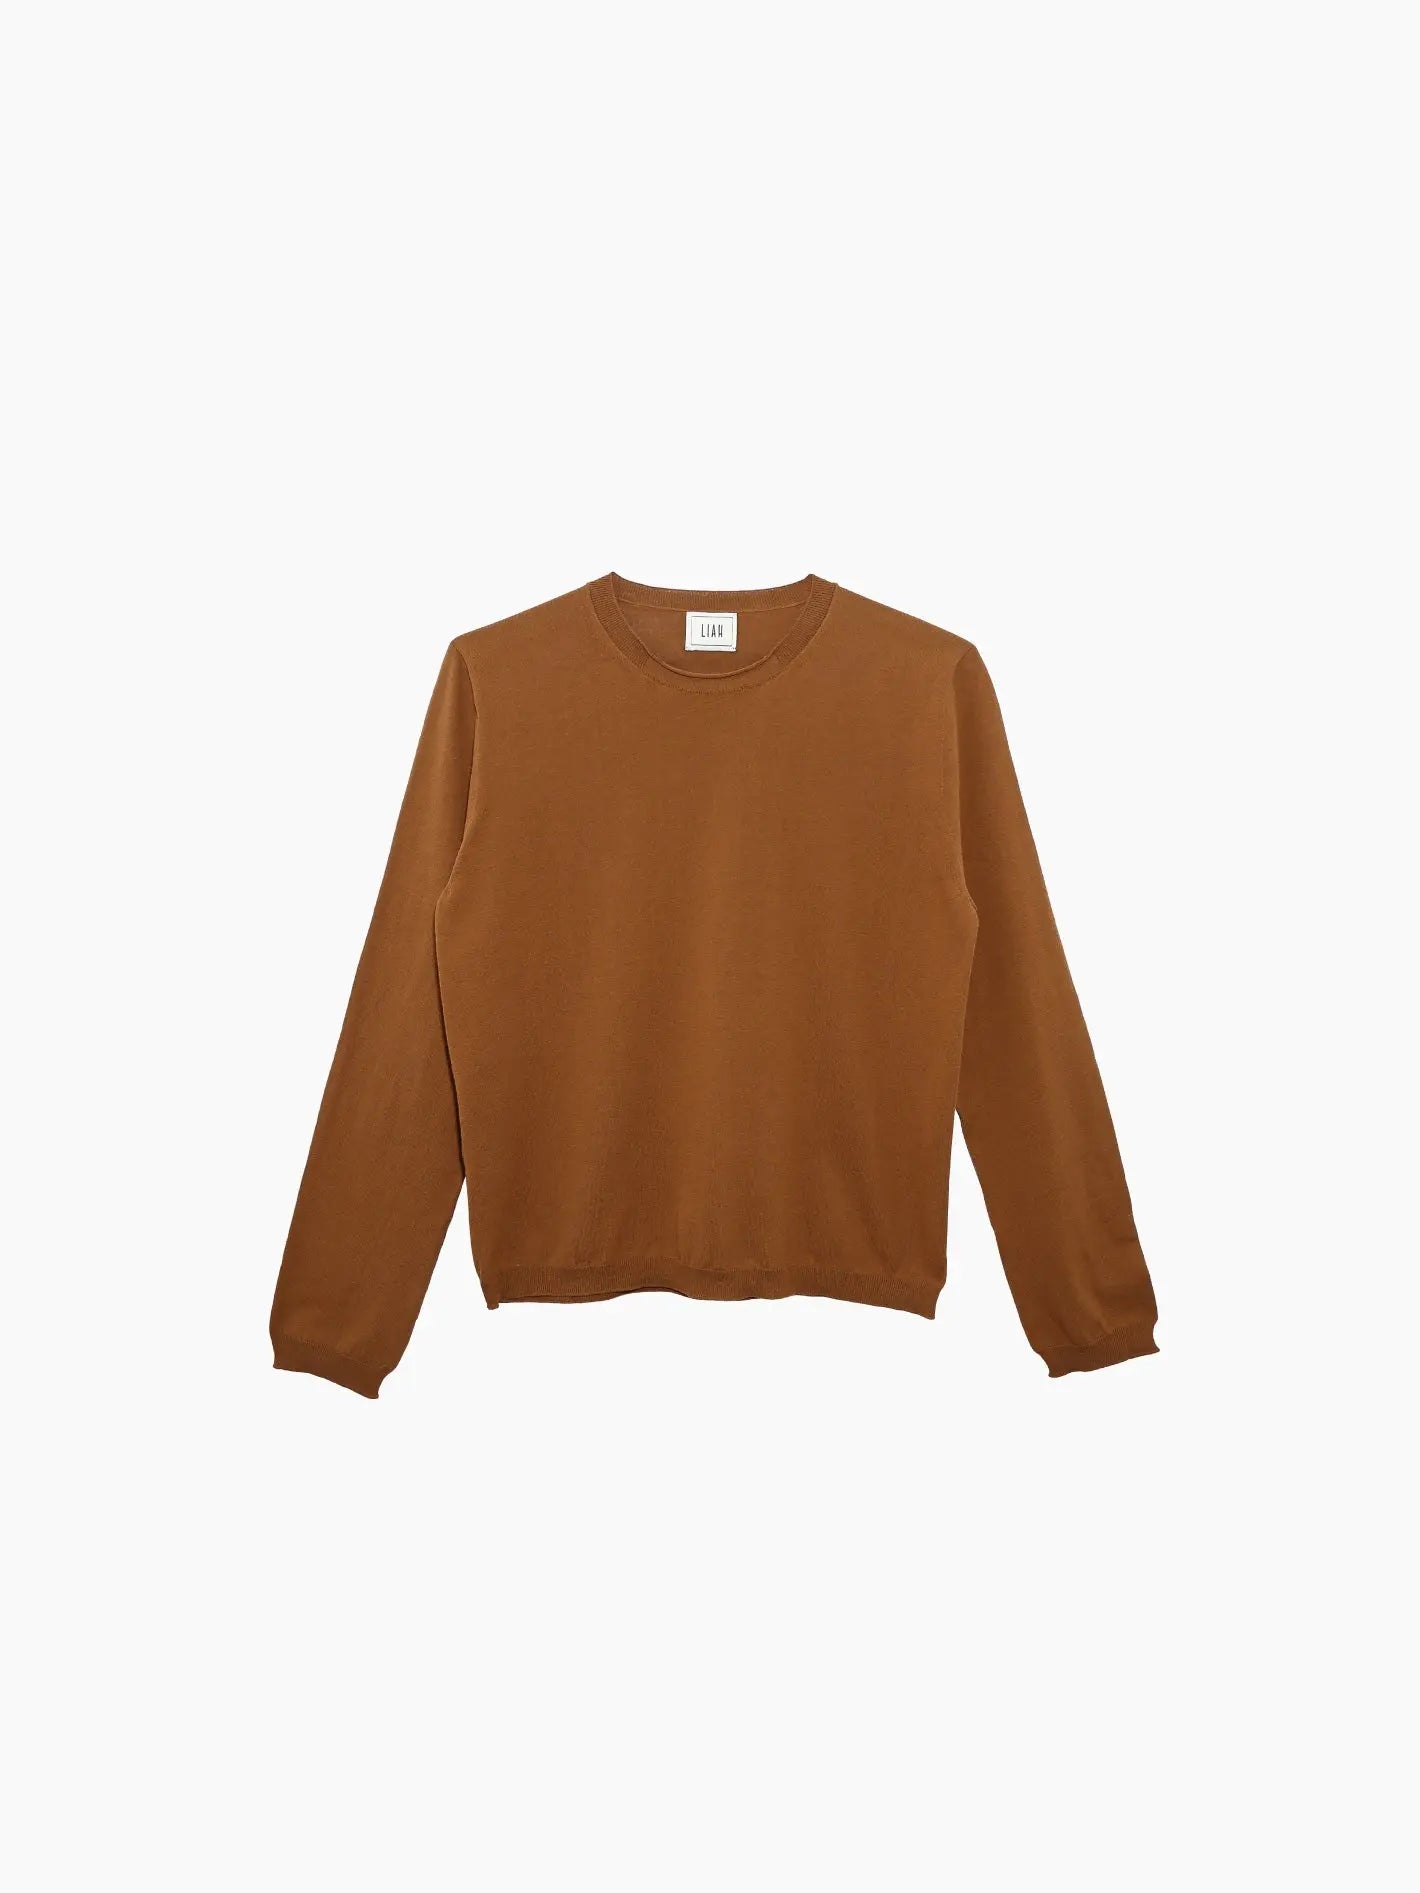 A Giada T-Shirt Caramel by Liah. This long-sleeve, crew neck sweatshirt in a brown shade is plain with ribbed cuffs and hem, featuring a simple design with no visible logos or patterns. Available at Bassalstore in Barcelona. The background is white.